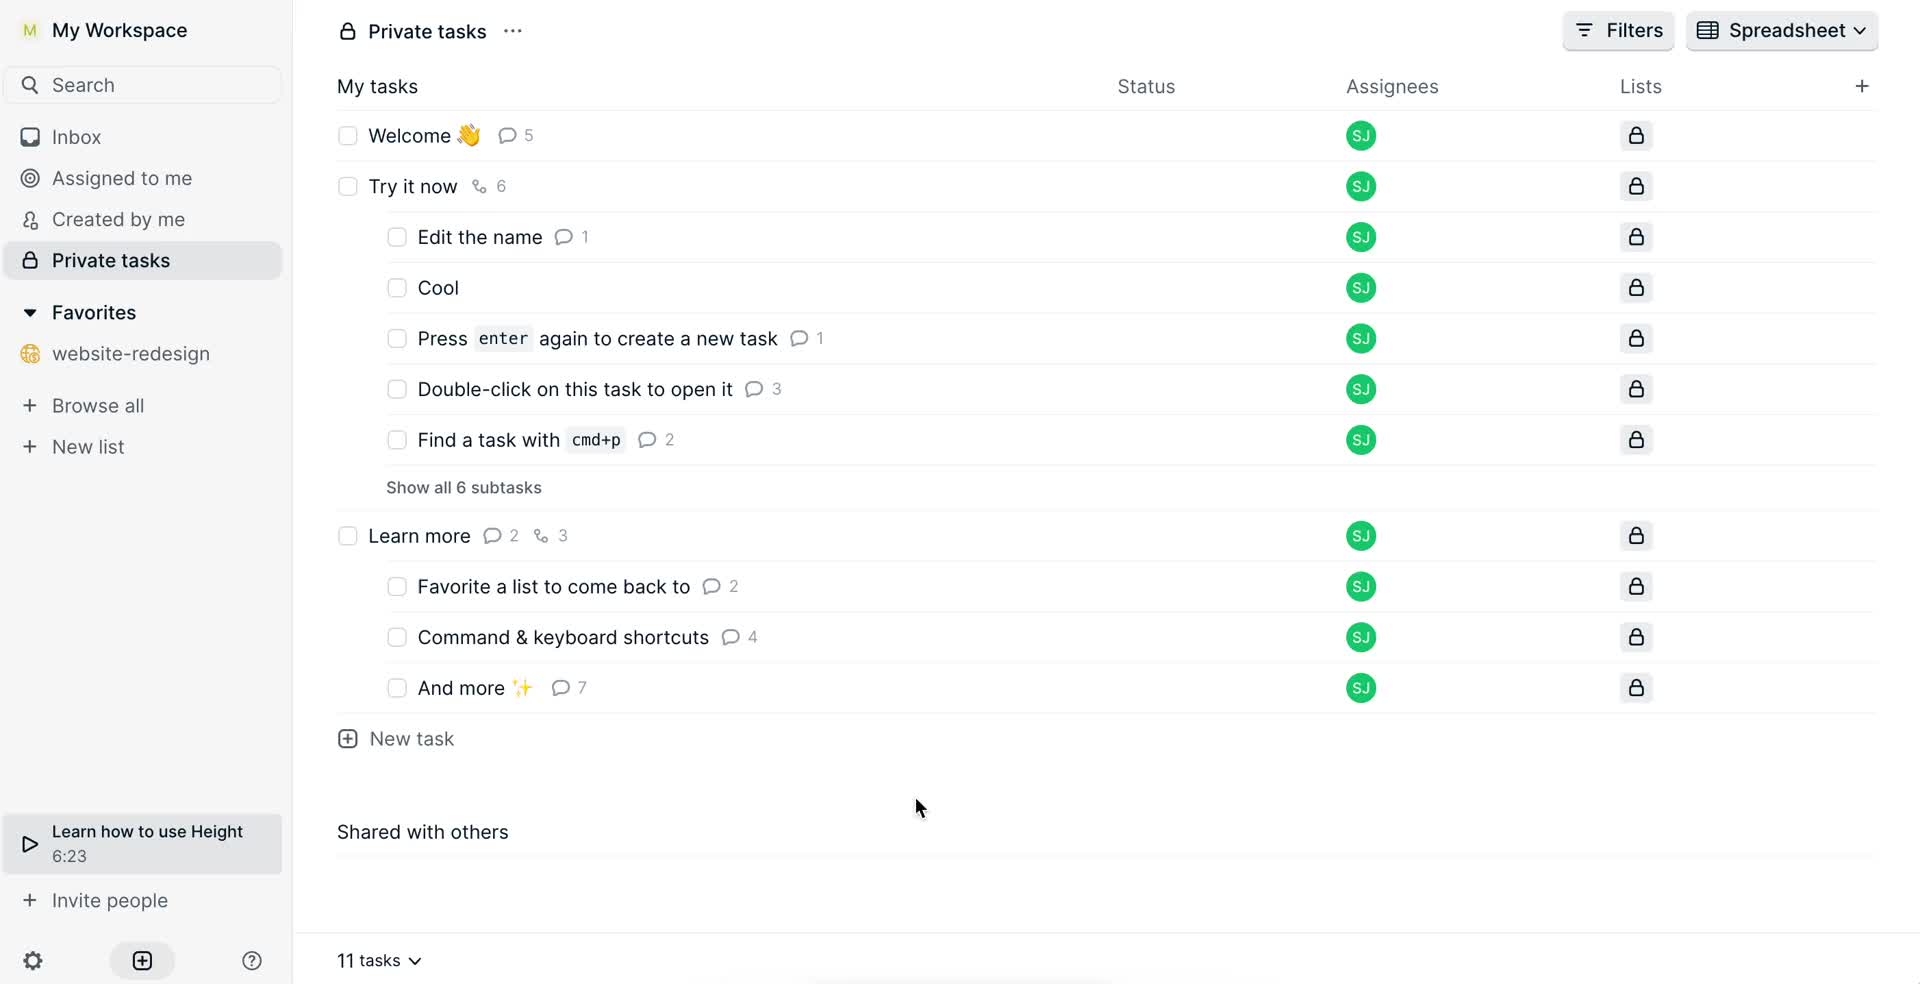 Screenshot of Tasks on Inviting people on Height user flow